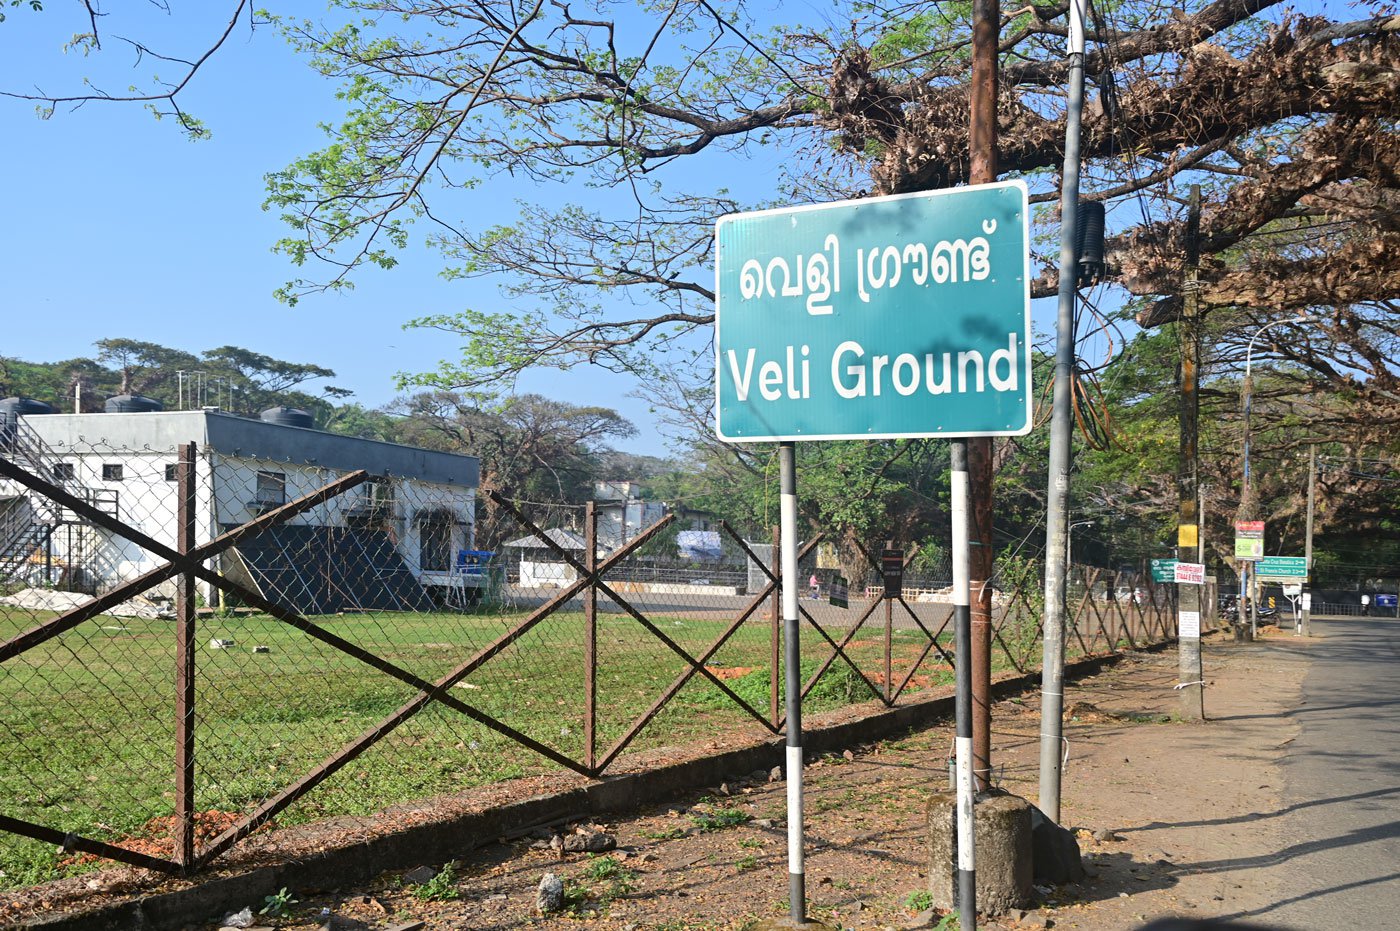 Veli Ground in Fort Kochi where the laundry is located